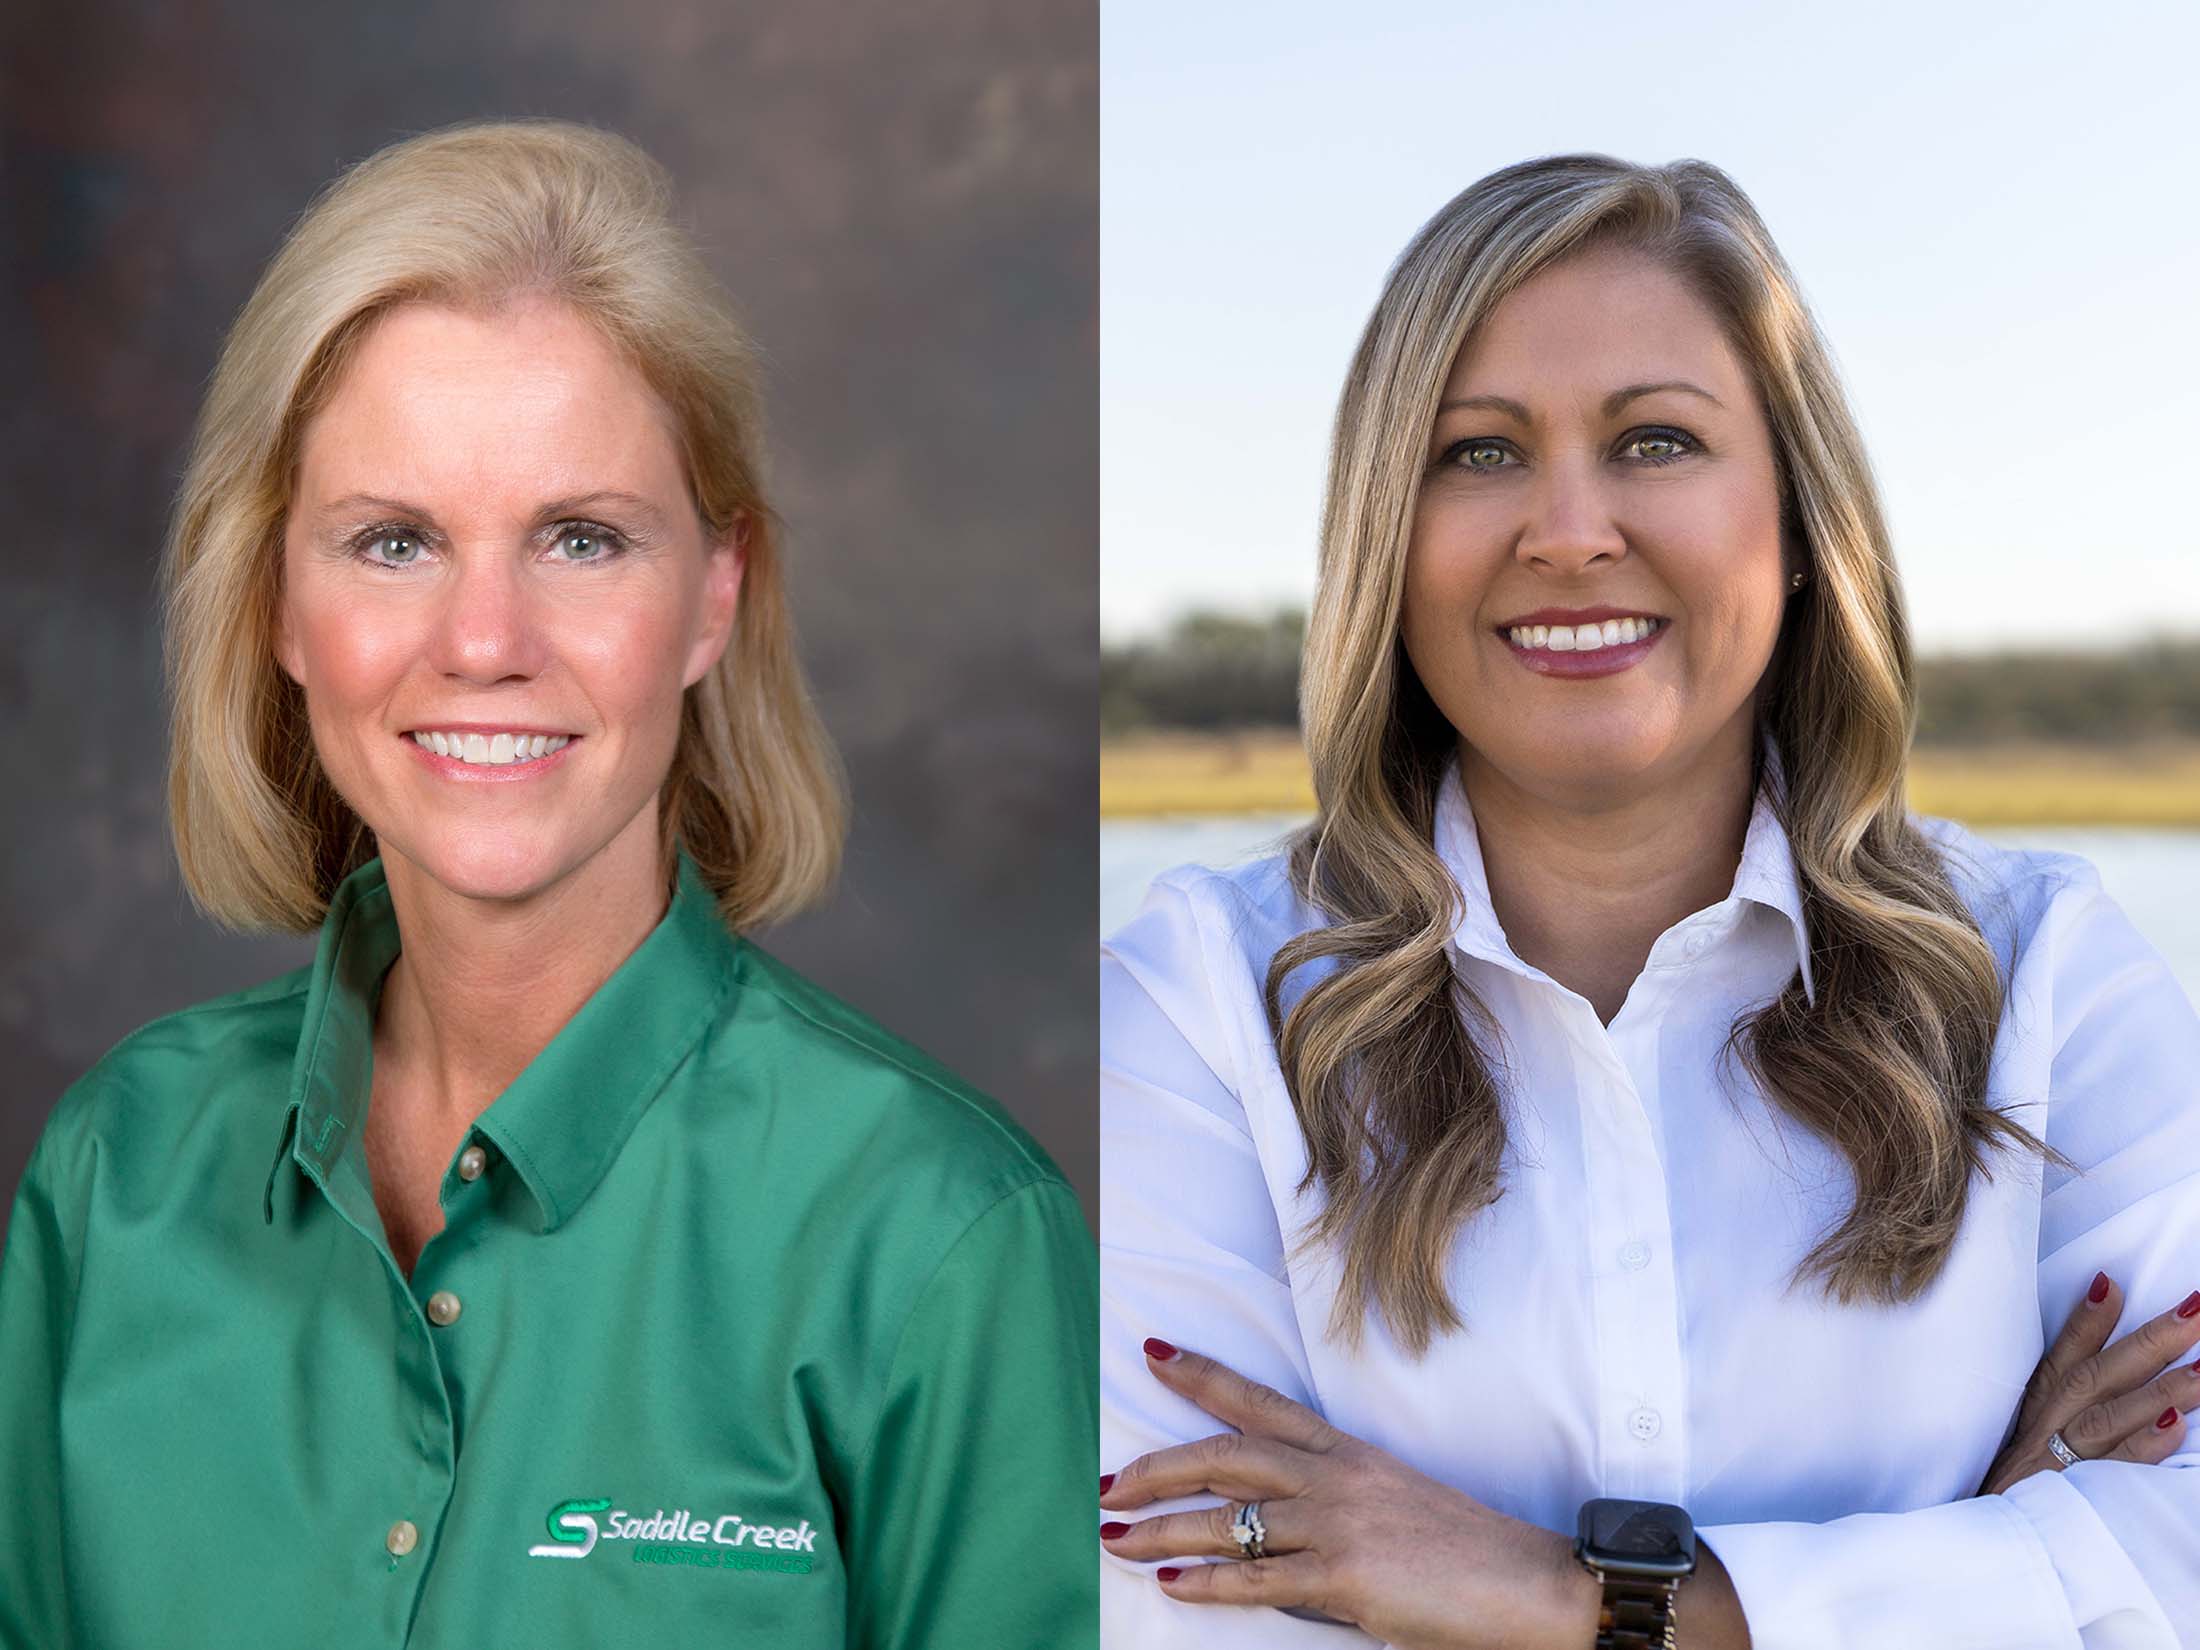 Donna Slyster, senior vice president and chief innovation officer at Saddle Creek Logistics Services, and Kristen Lowers, the company's chief information officer